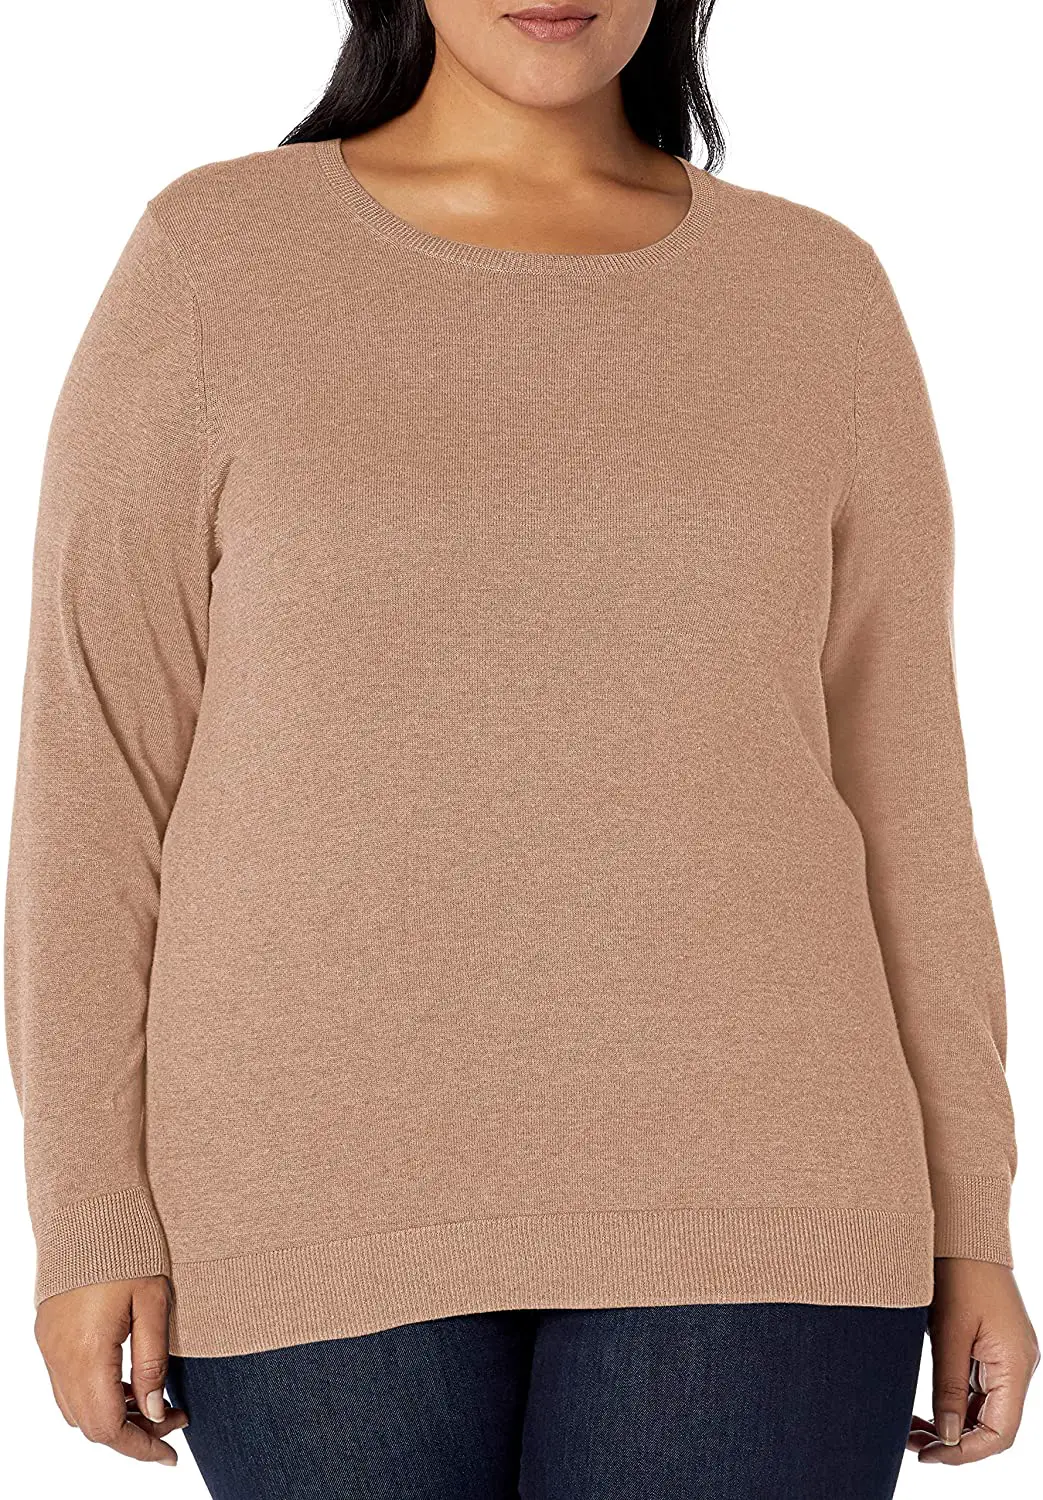 Plus Size Pullover 09